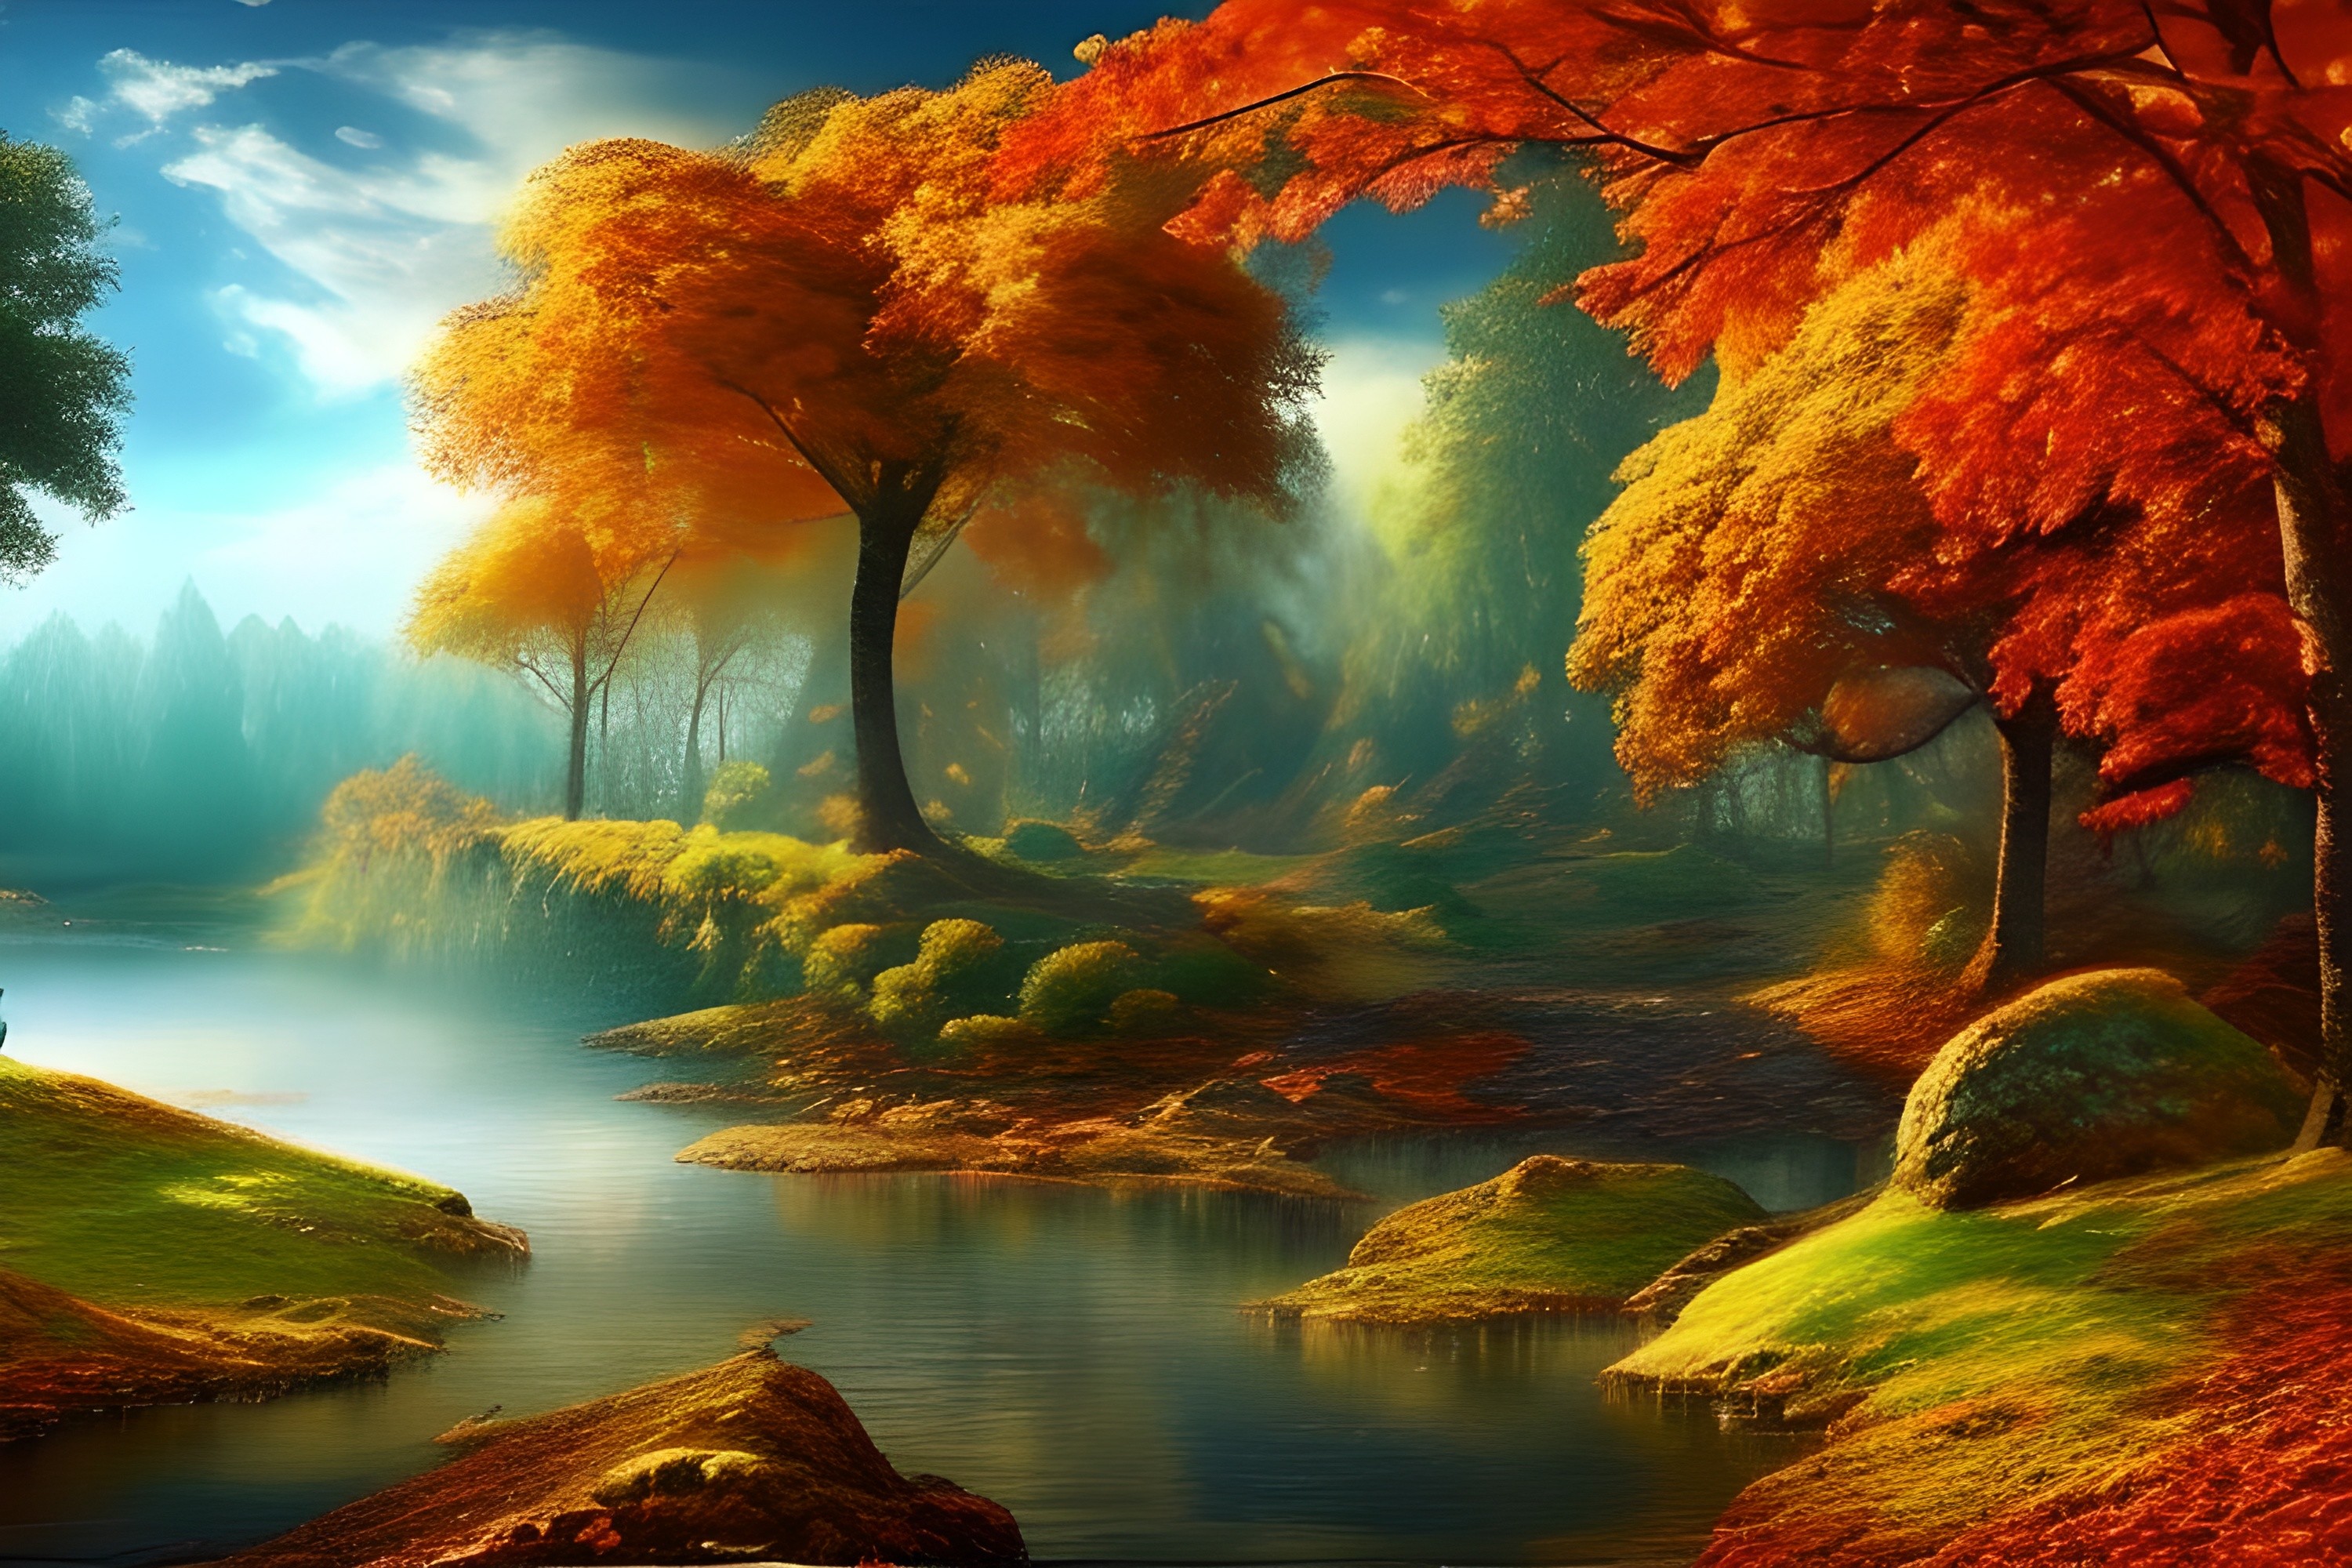 Autumn Landscape Background Graphic by Craftable · Creative Fabrica